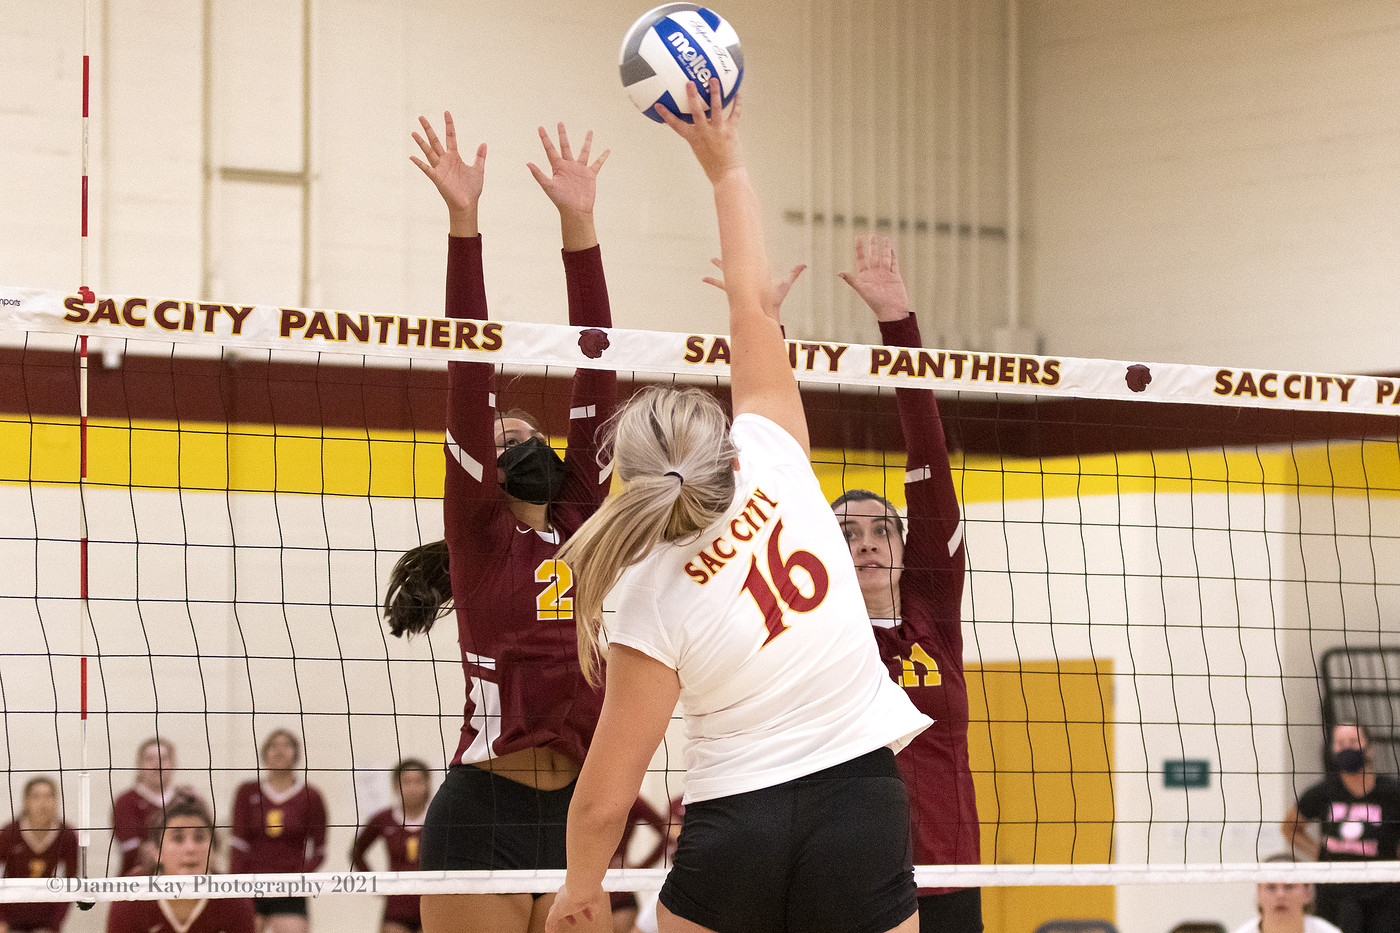 The Panthers lose the season opener to the Roadrunners 3-2 (19-25, 25-21, 14-25, 25-22, 15-9)